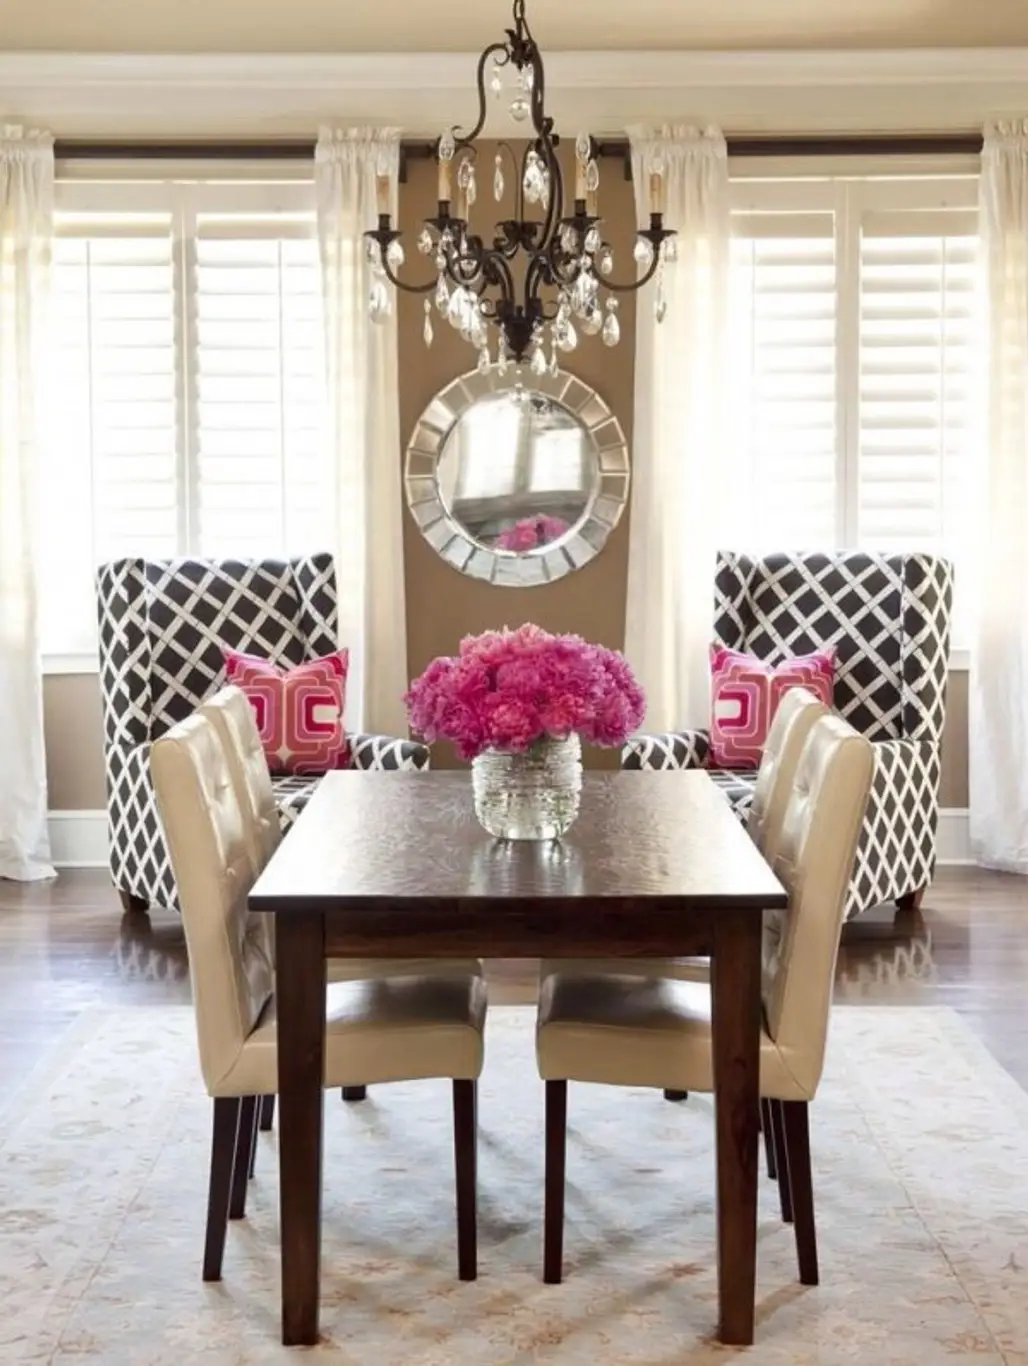 A Splash of Pink Panache for the Dining Room